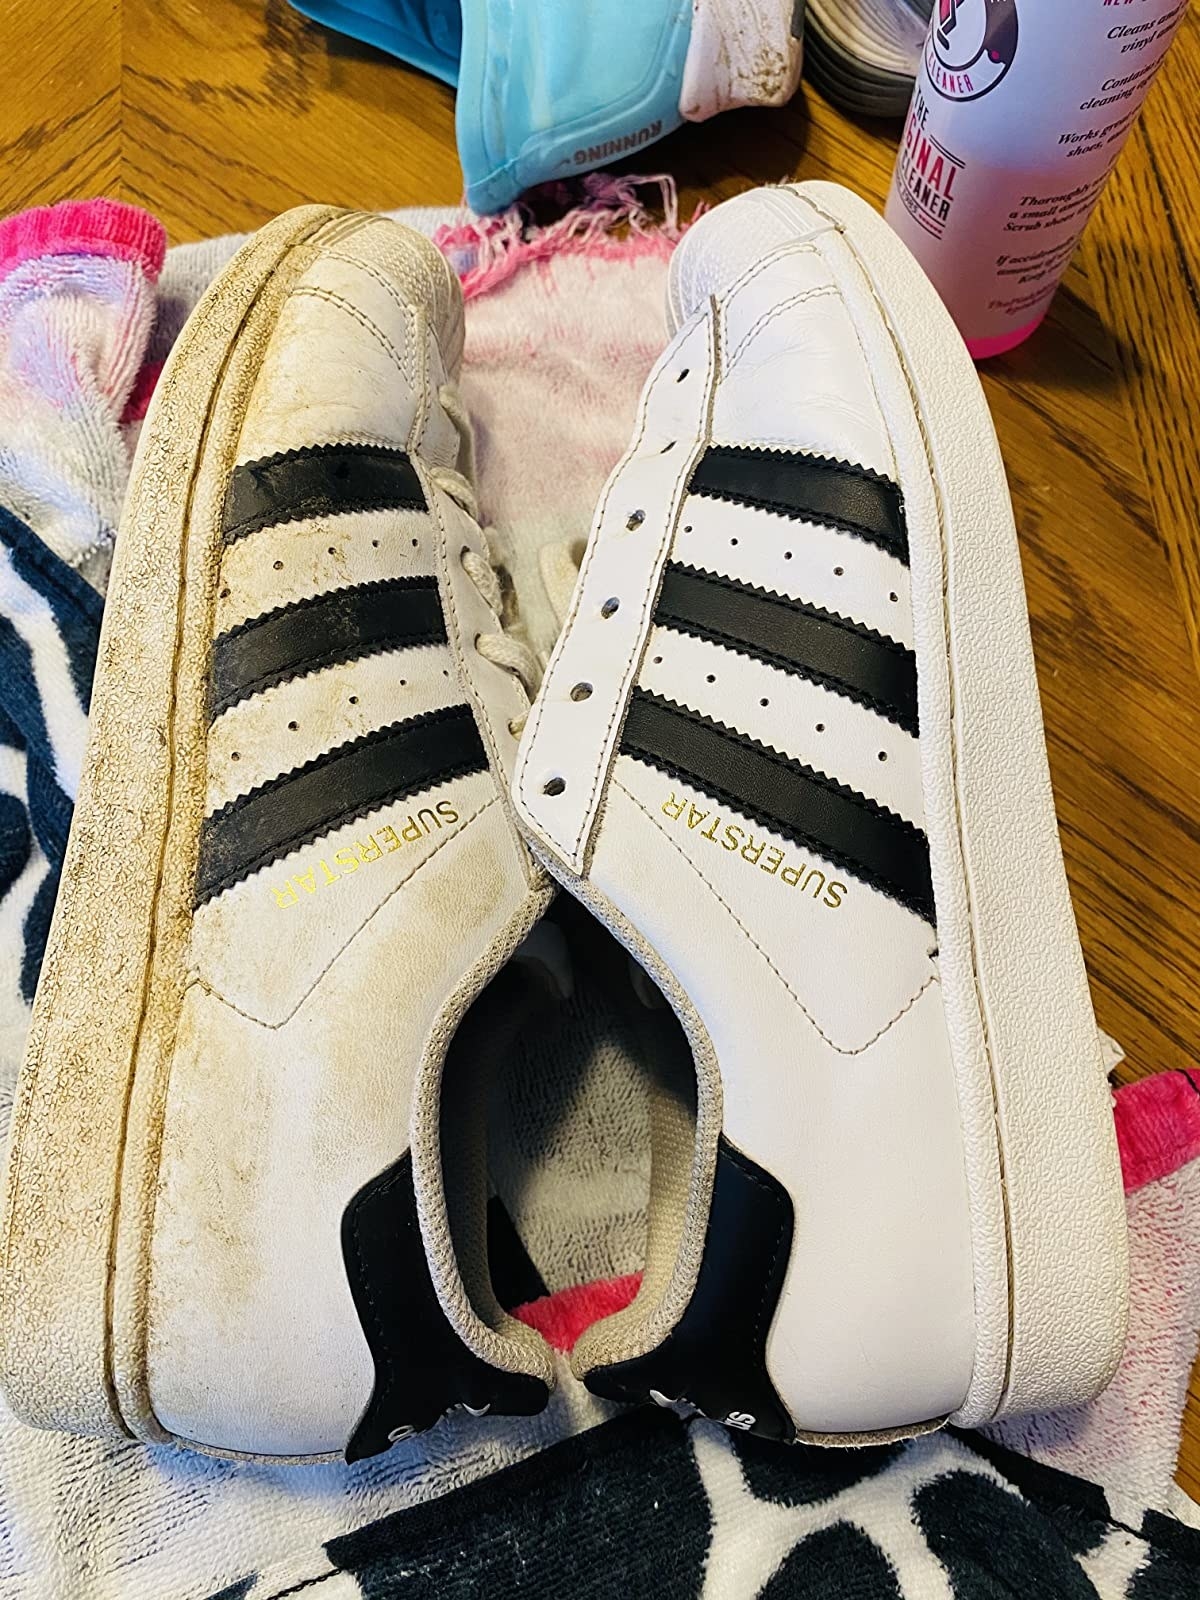 reviewer&#x27;s dirty adidas shoe on the left and a clean adidas shoe on the right